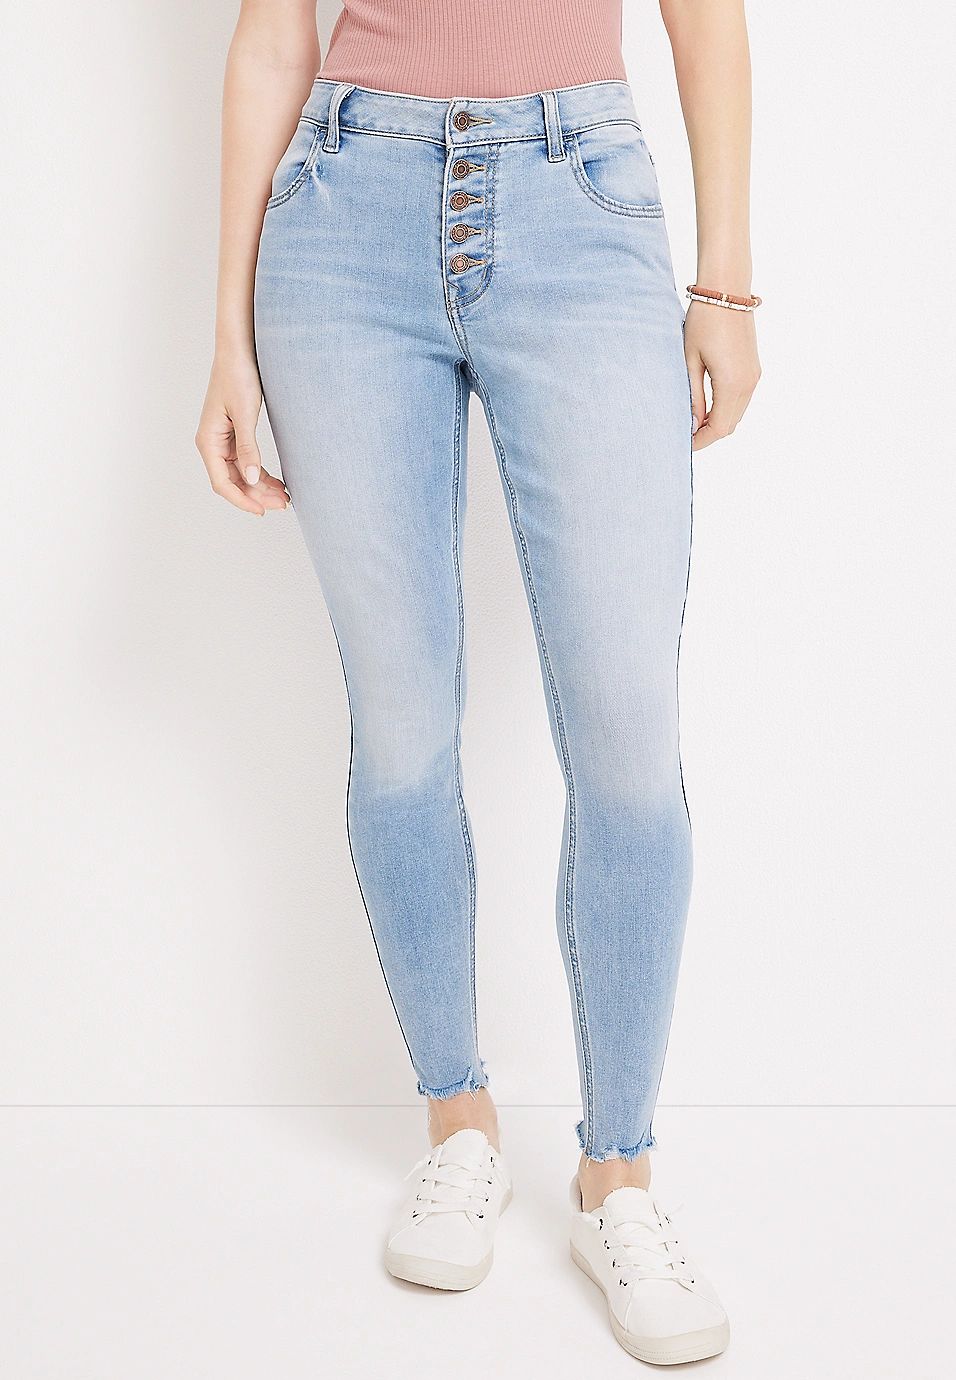 m jeans by maurices™ Cool Comfort Curvy High Rise Super Skinny Jean | Maurices